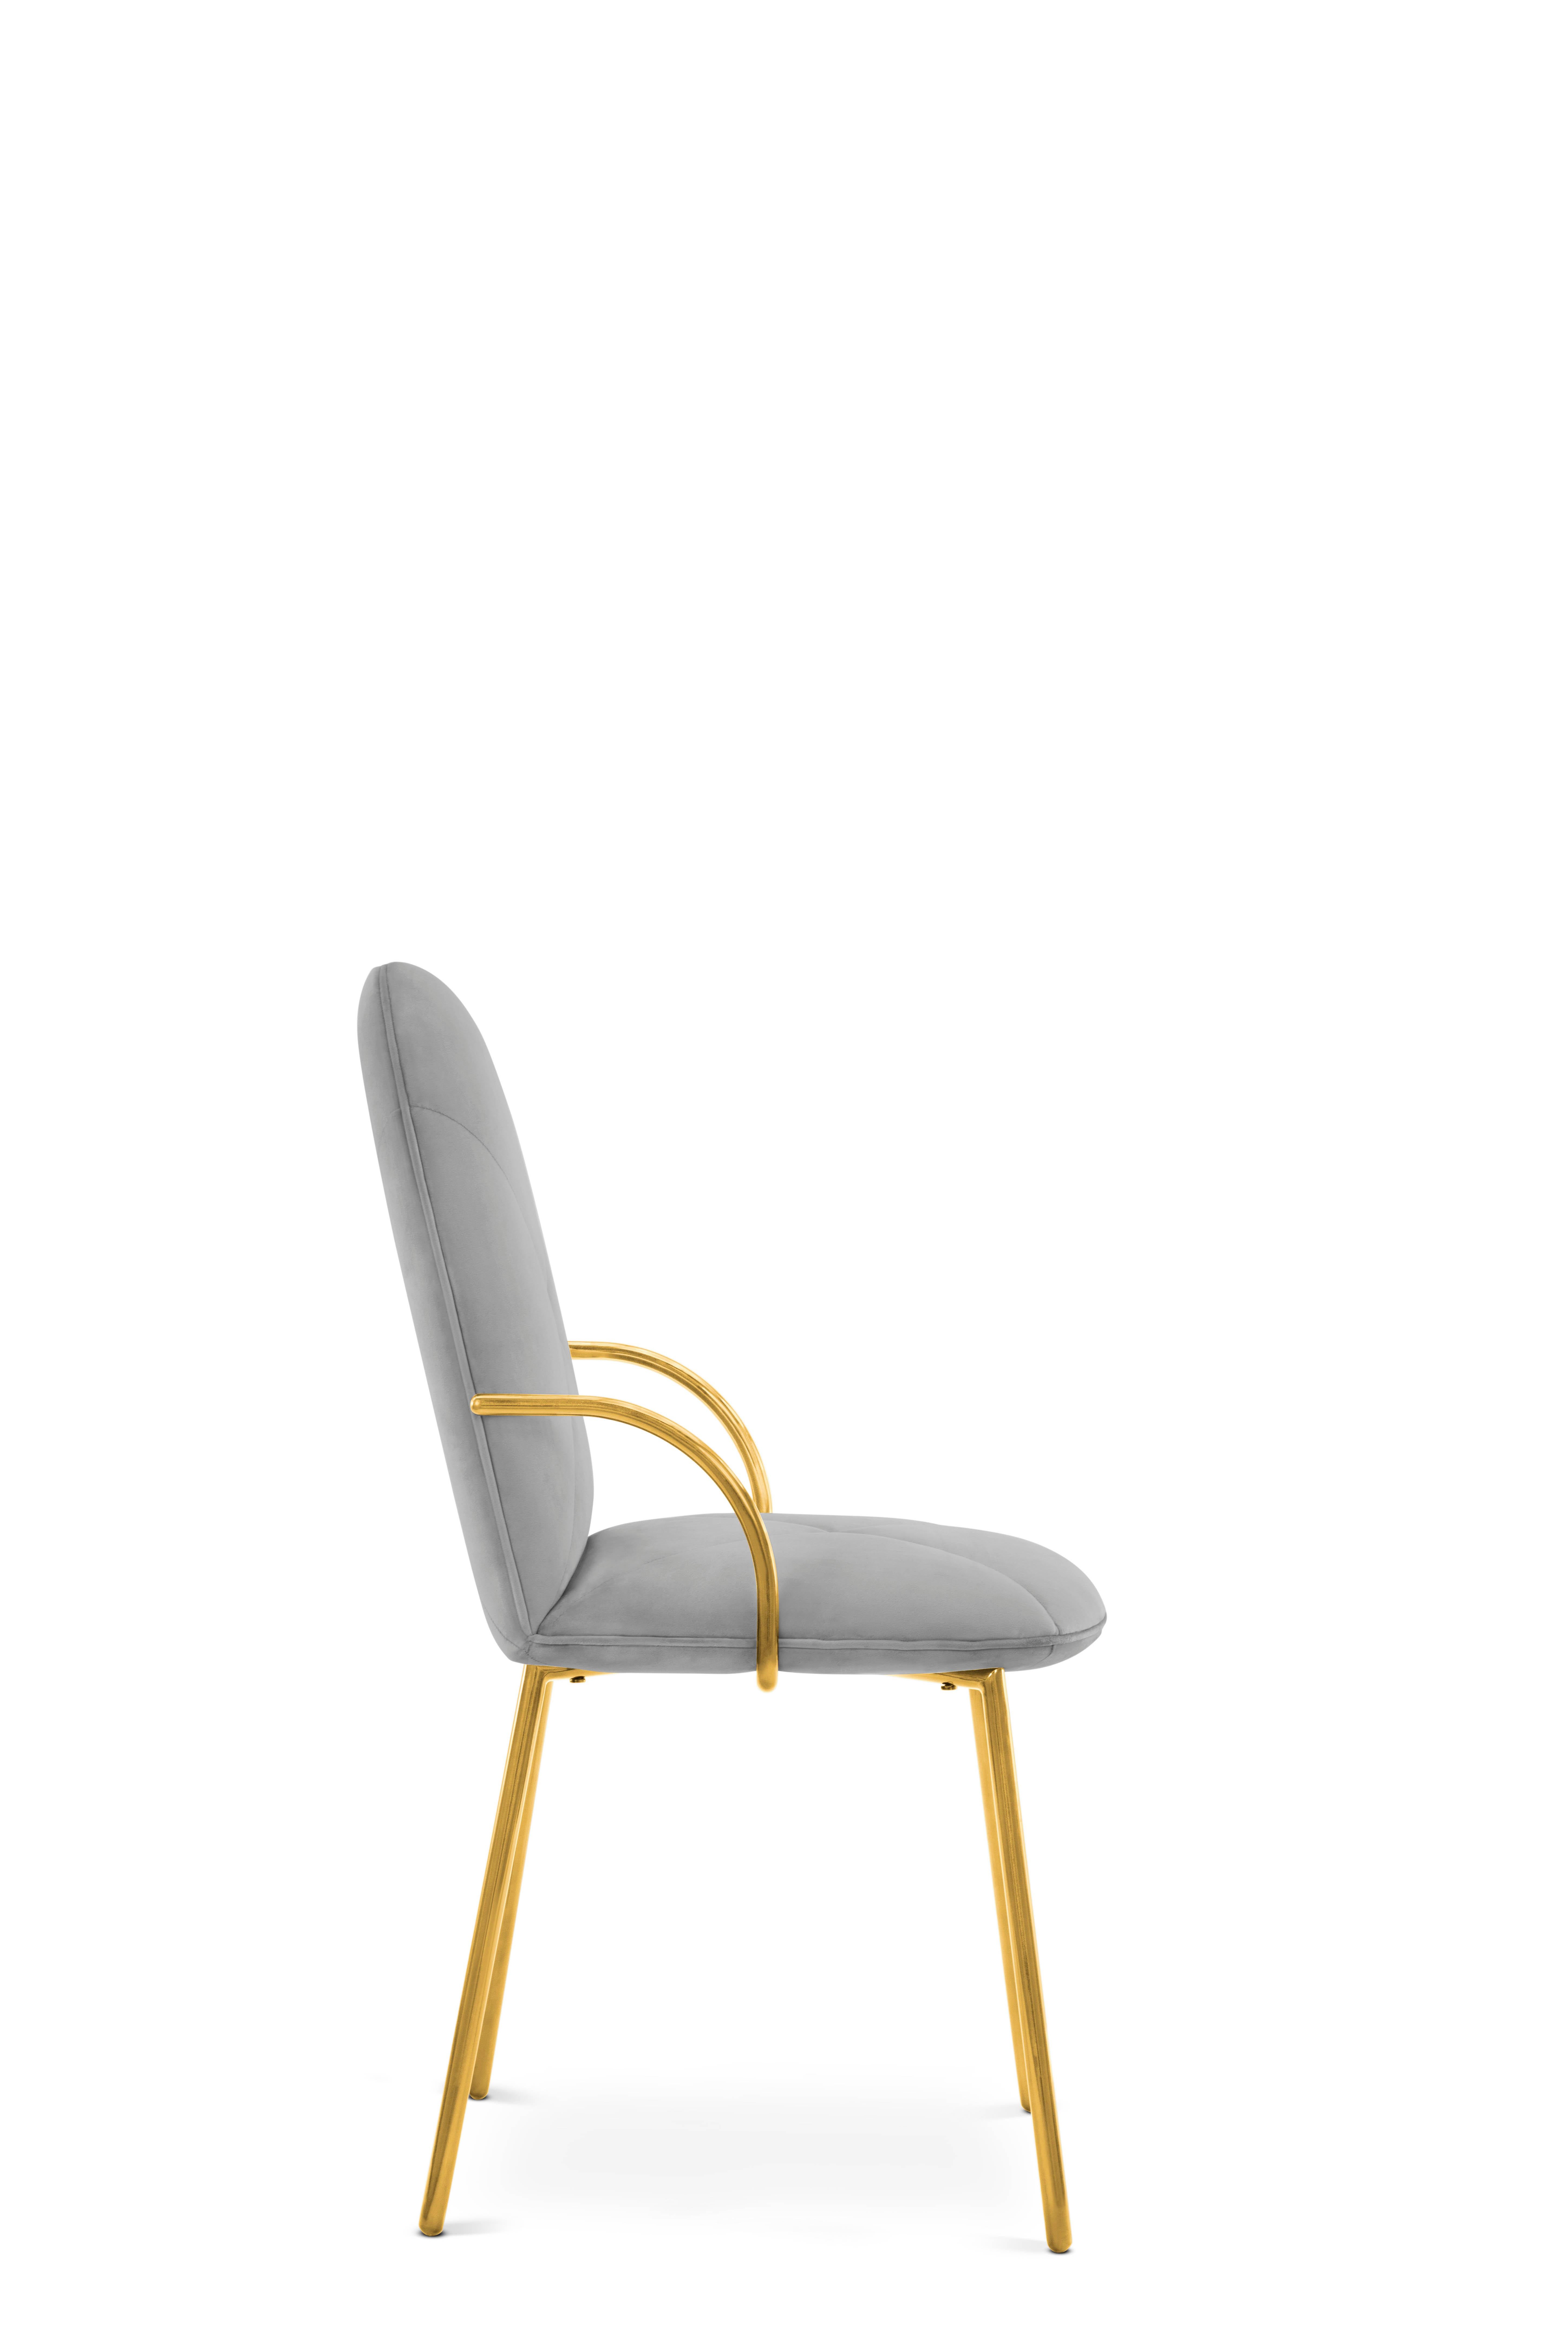 orion gold chair price